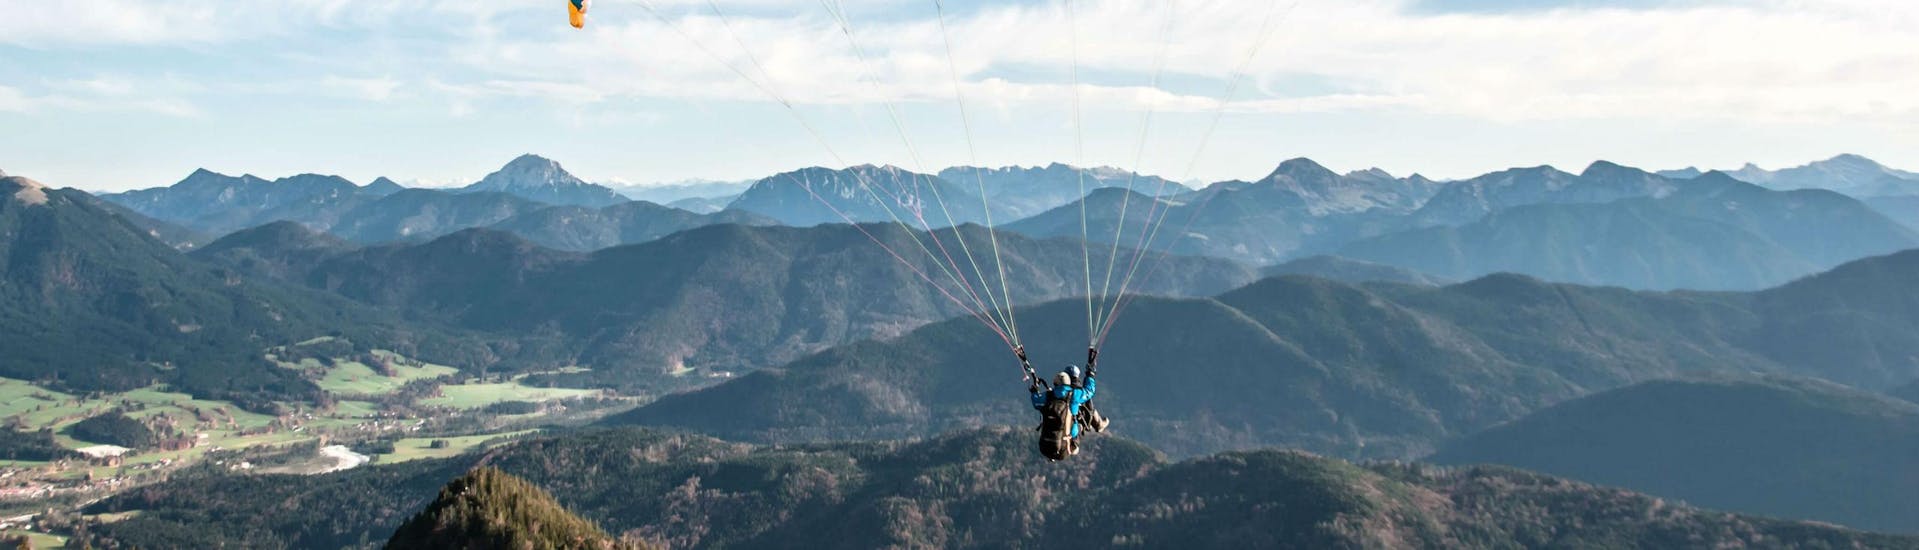 tandem-paragliding-in-wallberg-and-brauneck-bavarian-alps-paraworth-hero